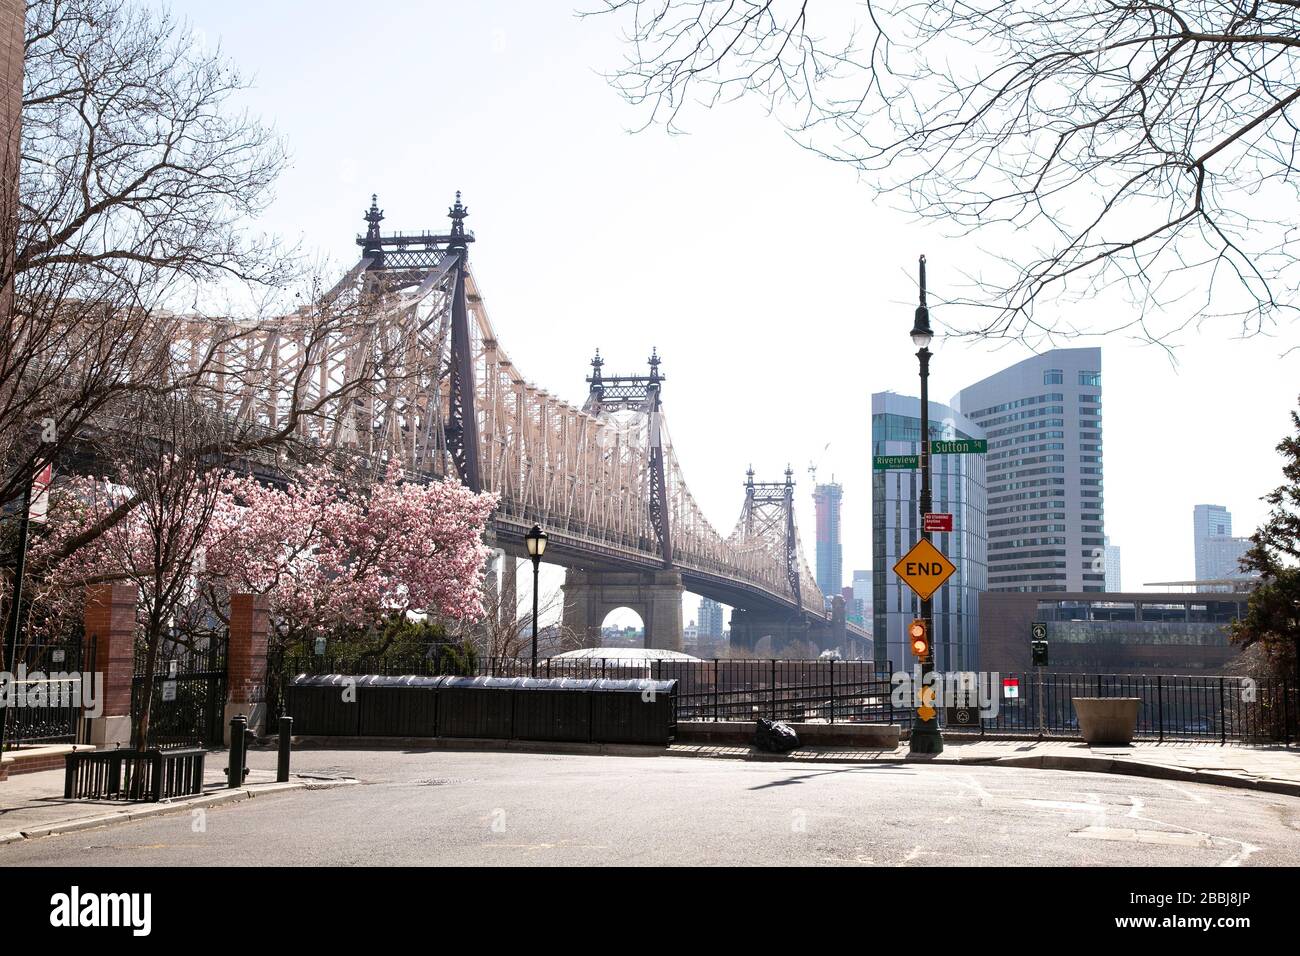 The end of East 58th Street with a view of the Queensboro Bridge. Stock Photo